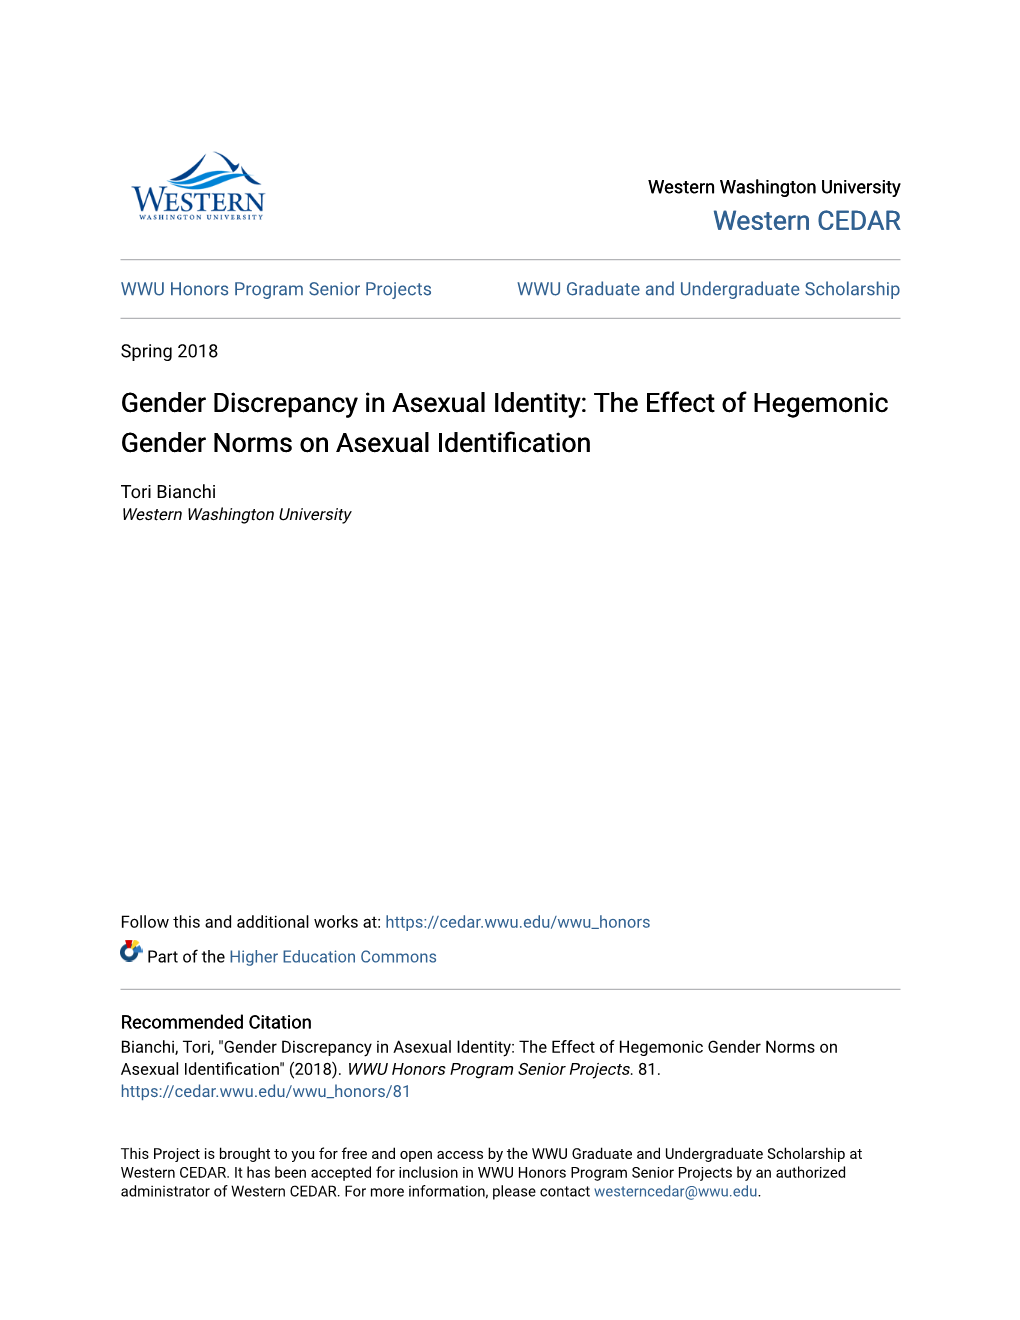 Gender Discrepancy in Asexual Identity: the Effect of Hegemonic Gender Norms on Asexual Identification